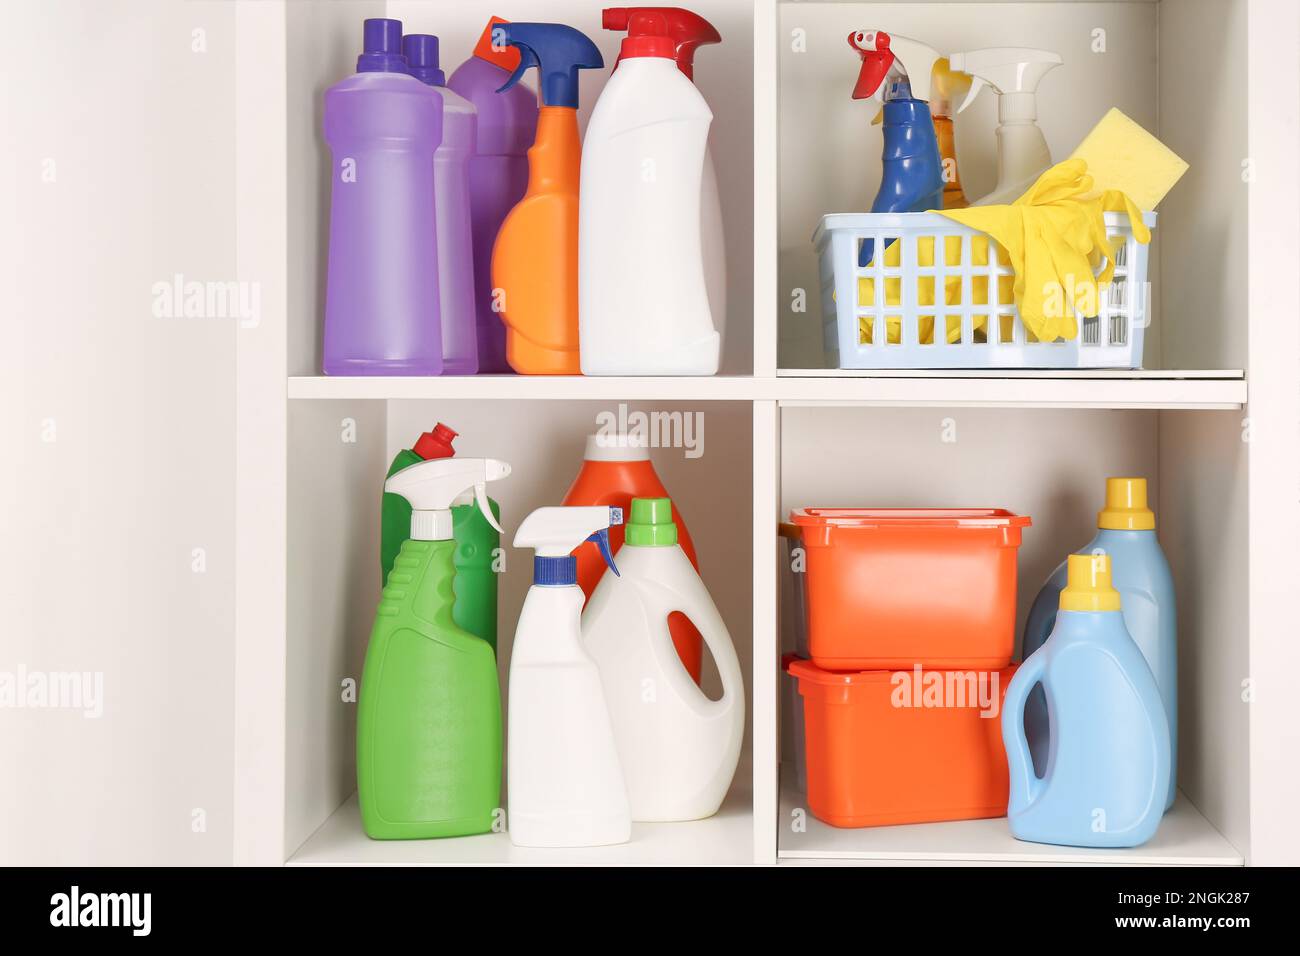 https://c8.alamy.com/comp/2NGK287/different-cleaning-supplies-and-tools-on-shelves-2NGK287.jpg